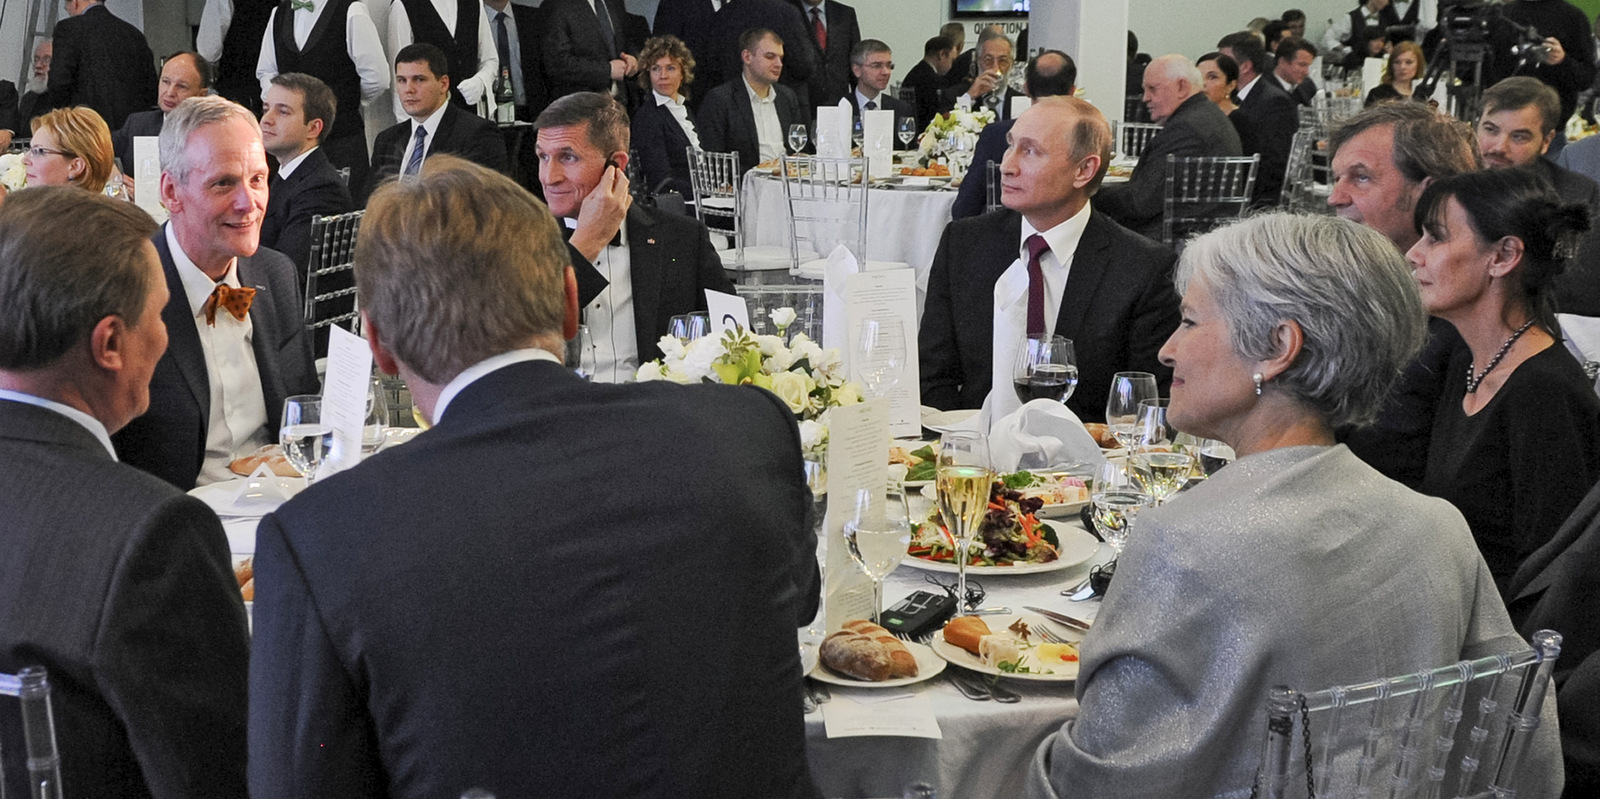 Retired Lt. Gen. Michael Flynn attending a dinner marking the RT network’s 10-year anniversary in Moscow, December 2015, sitting at the same table as Russian President Vladimir Putin and Green Party leader Jill Stein.